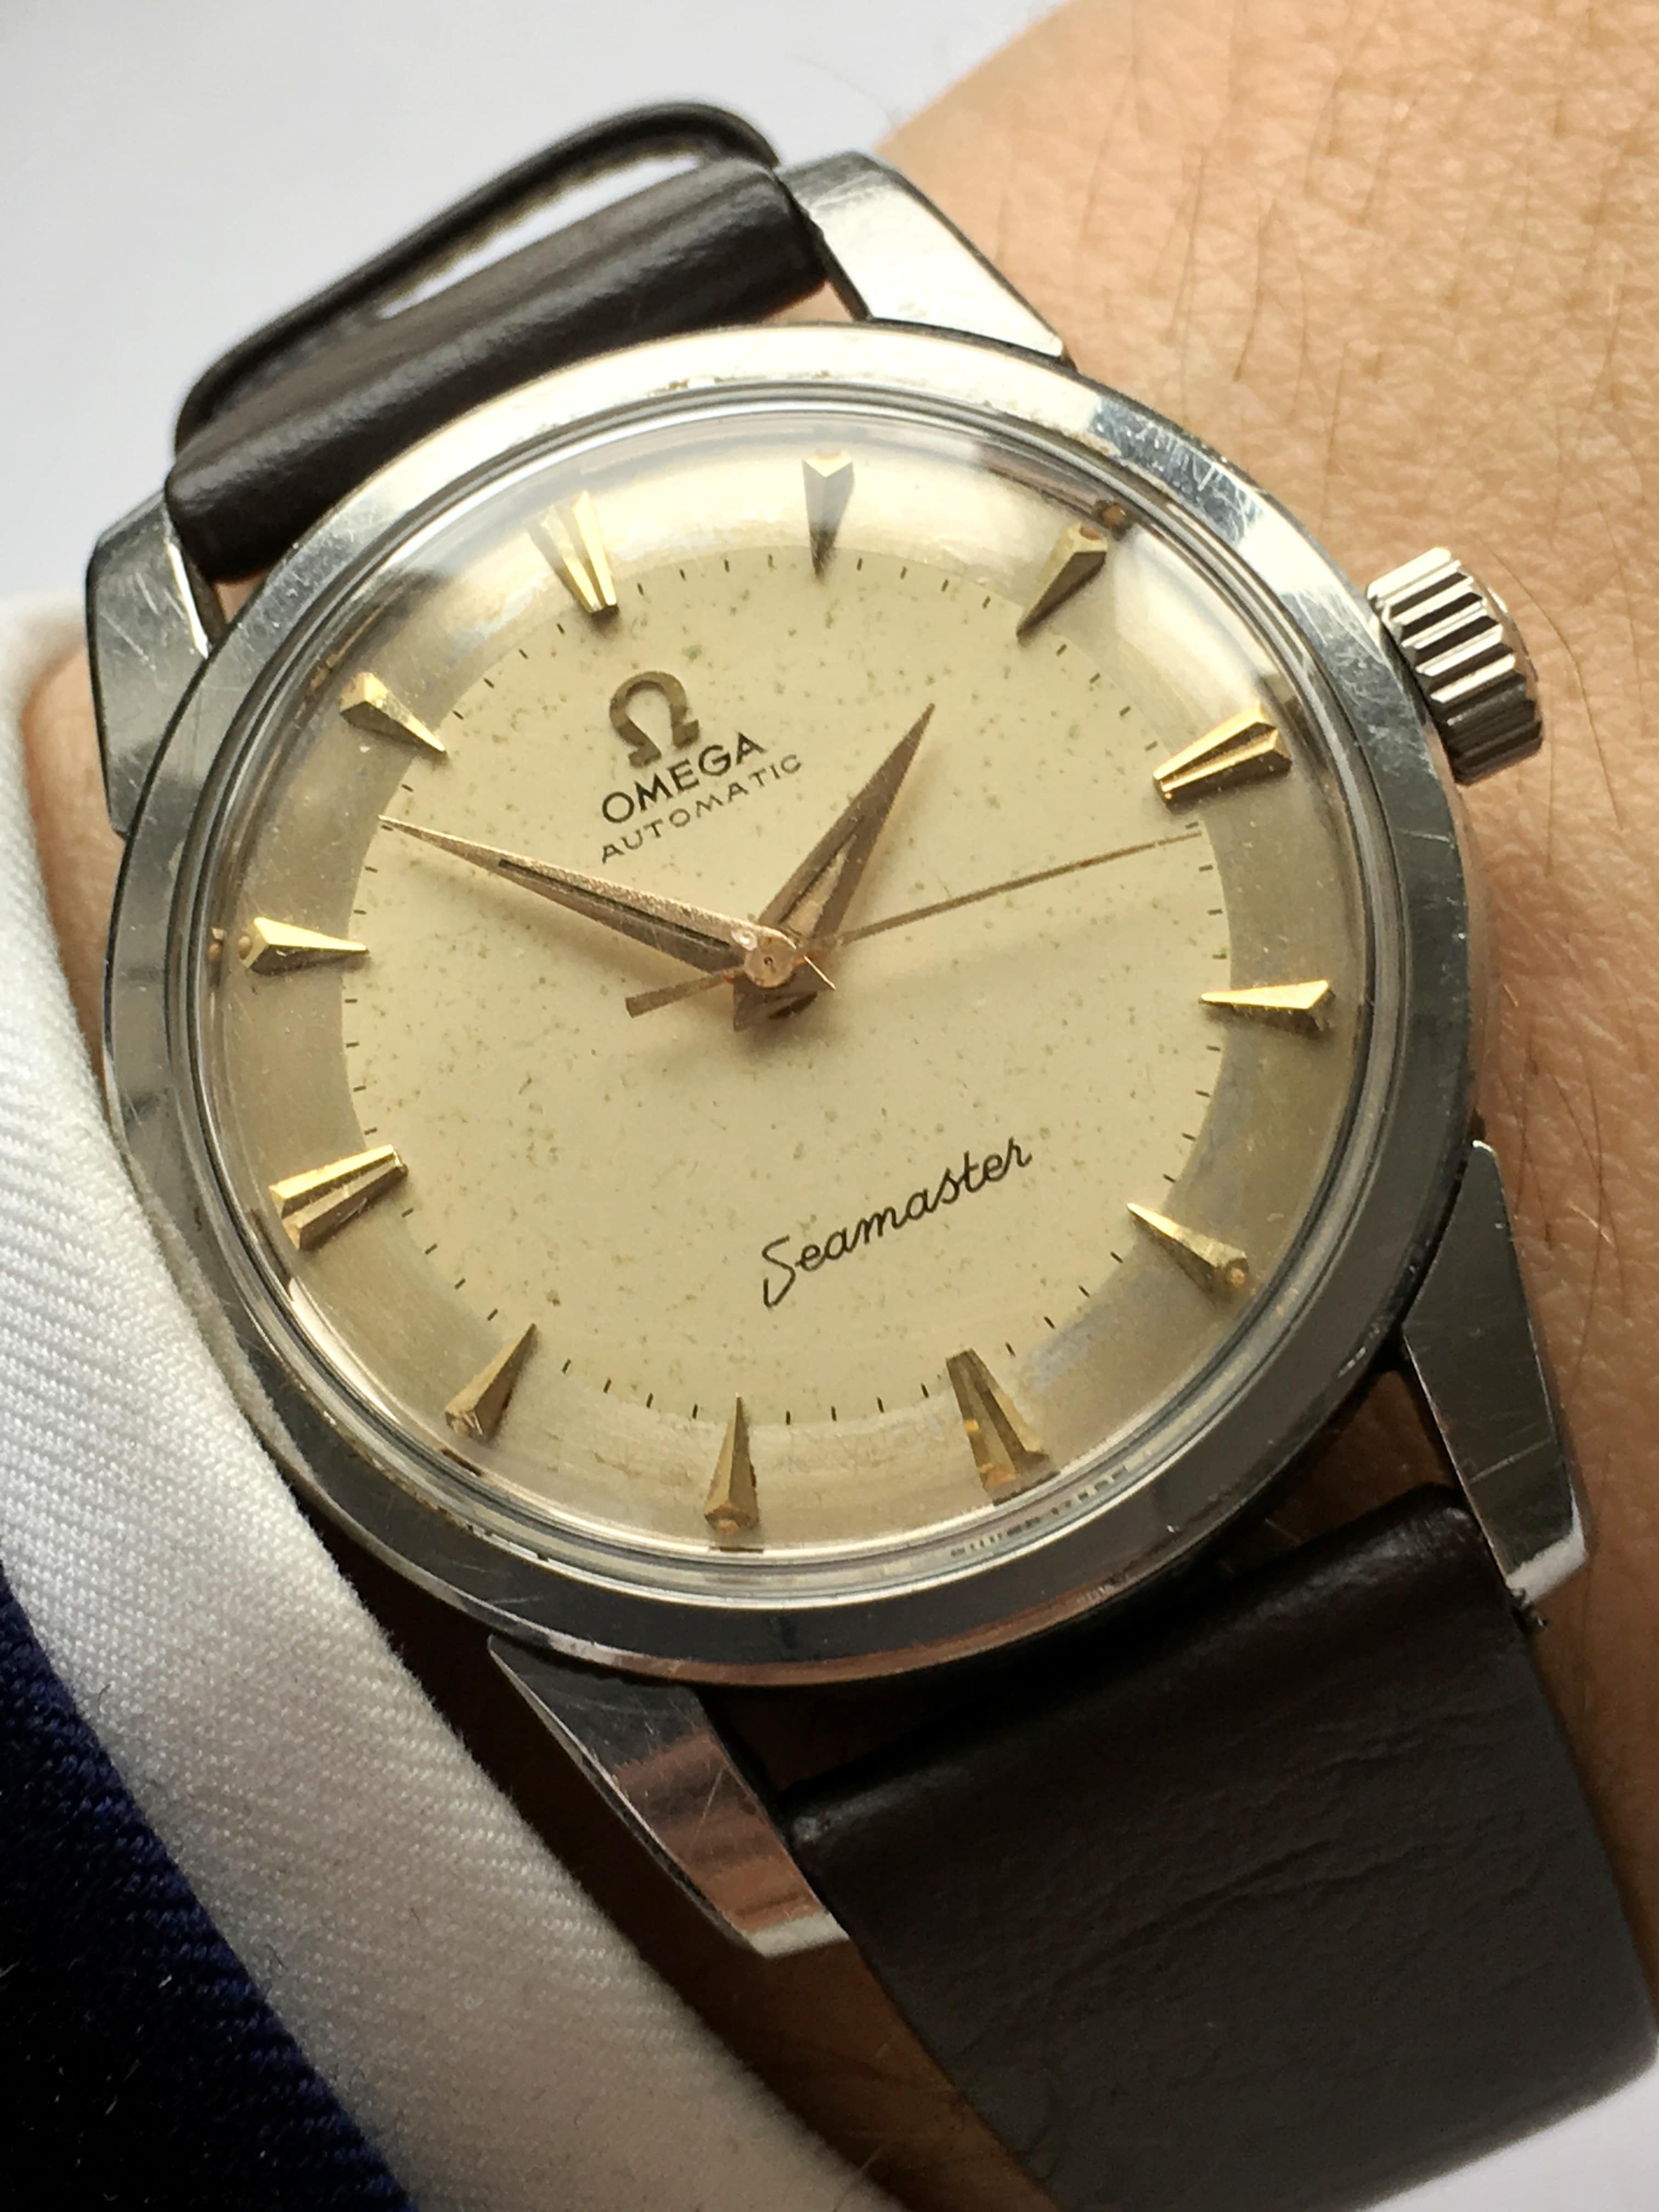 omega watches old models